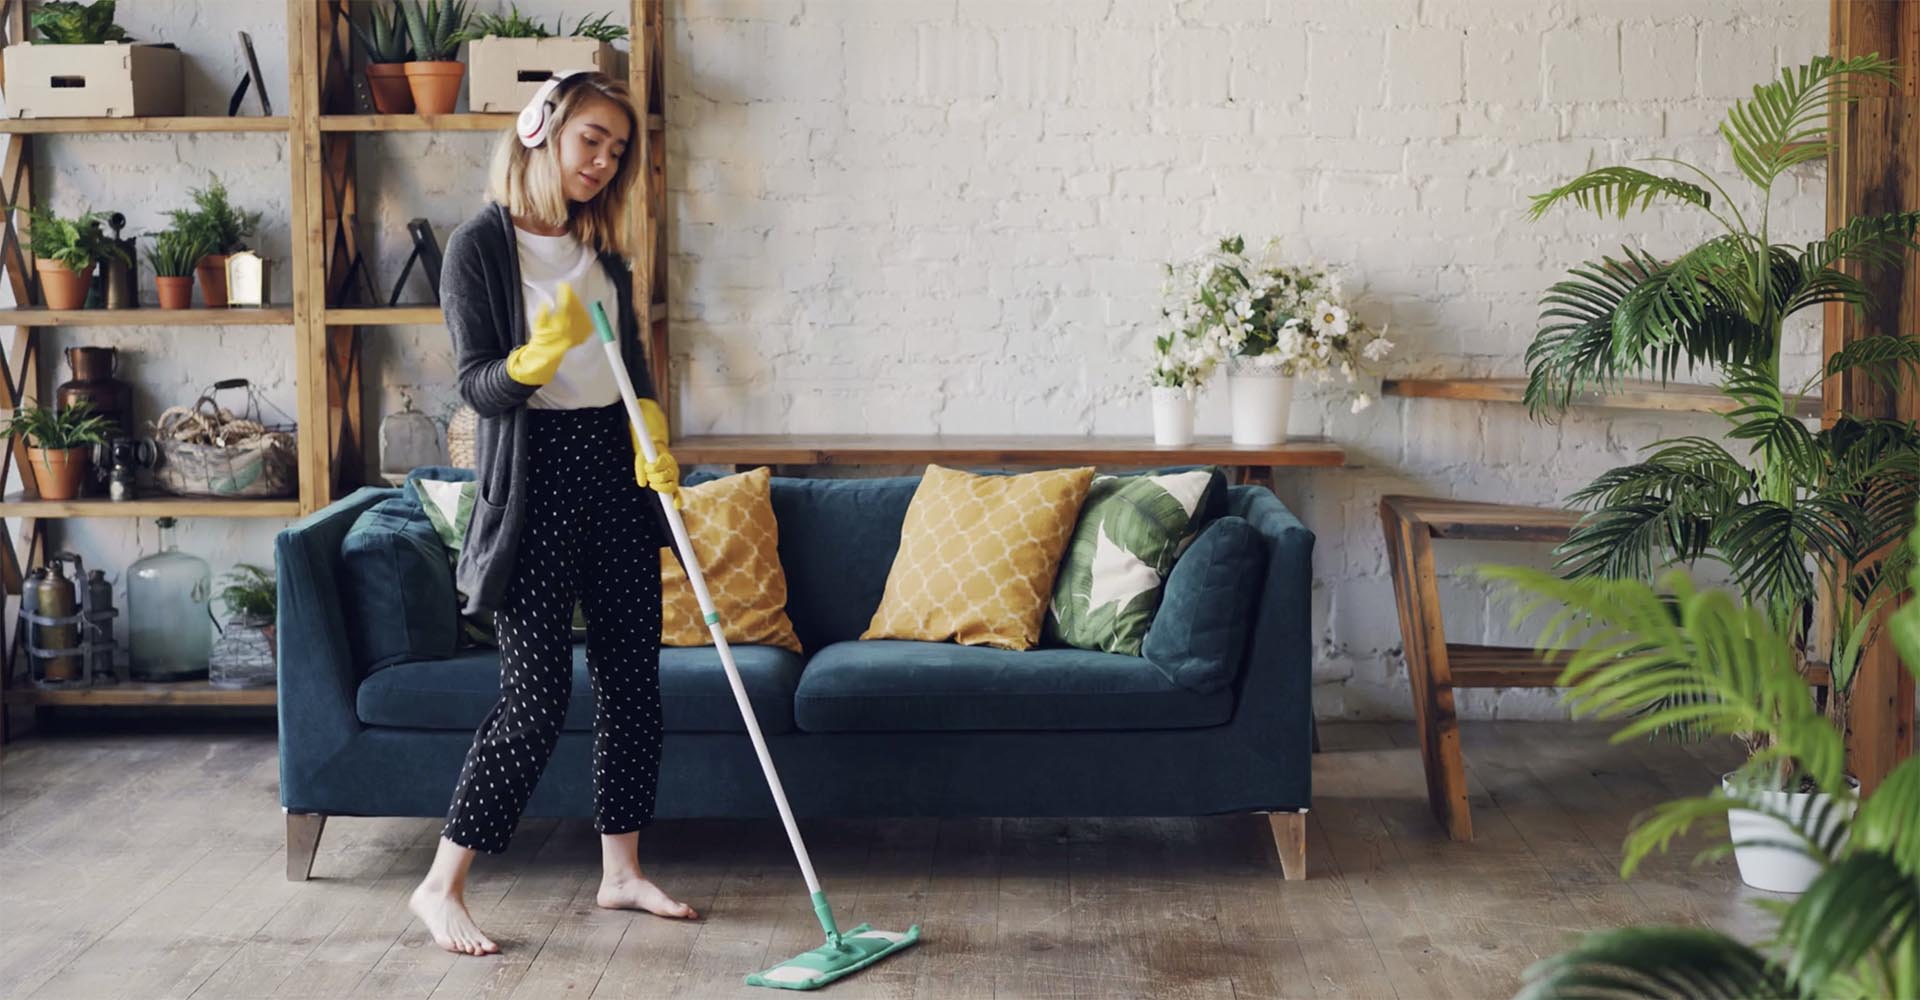 6 steps for spring cleaning success